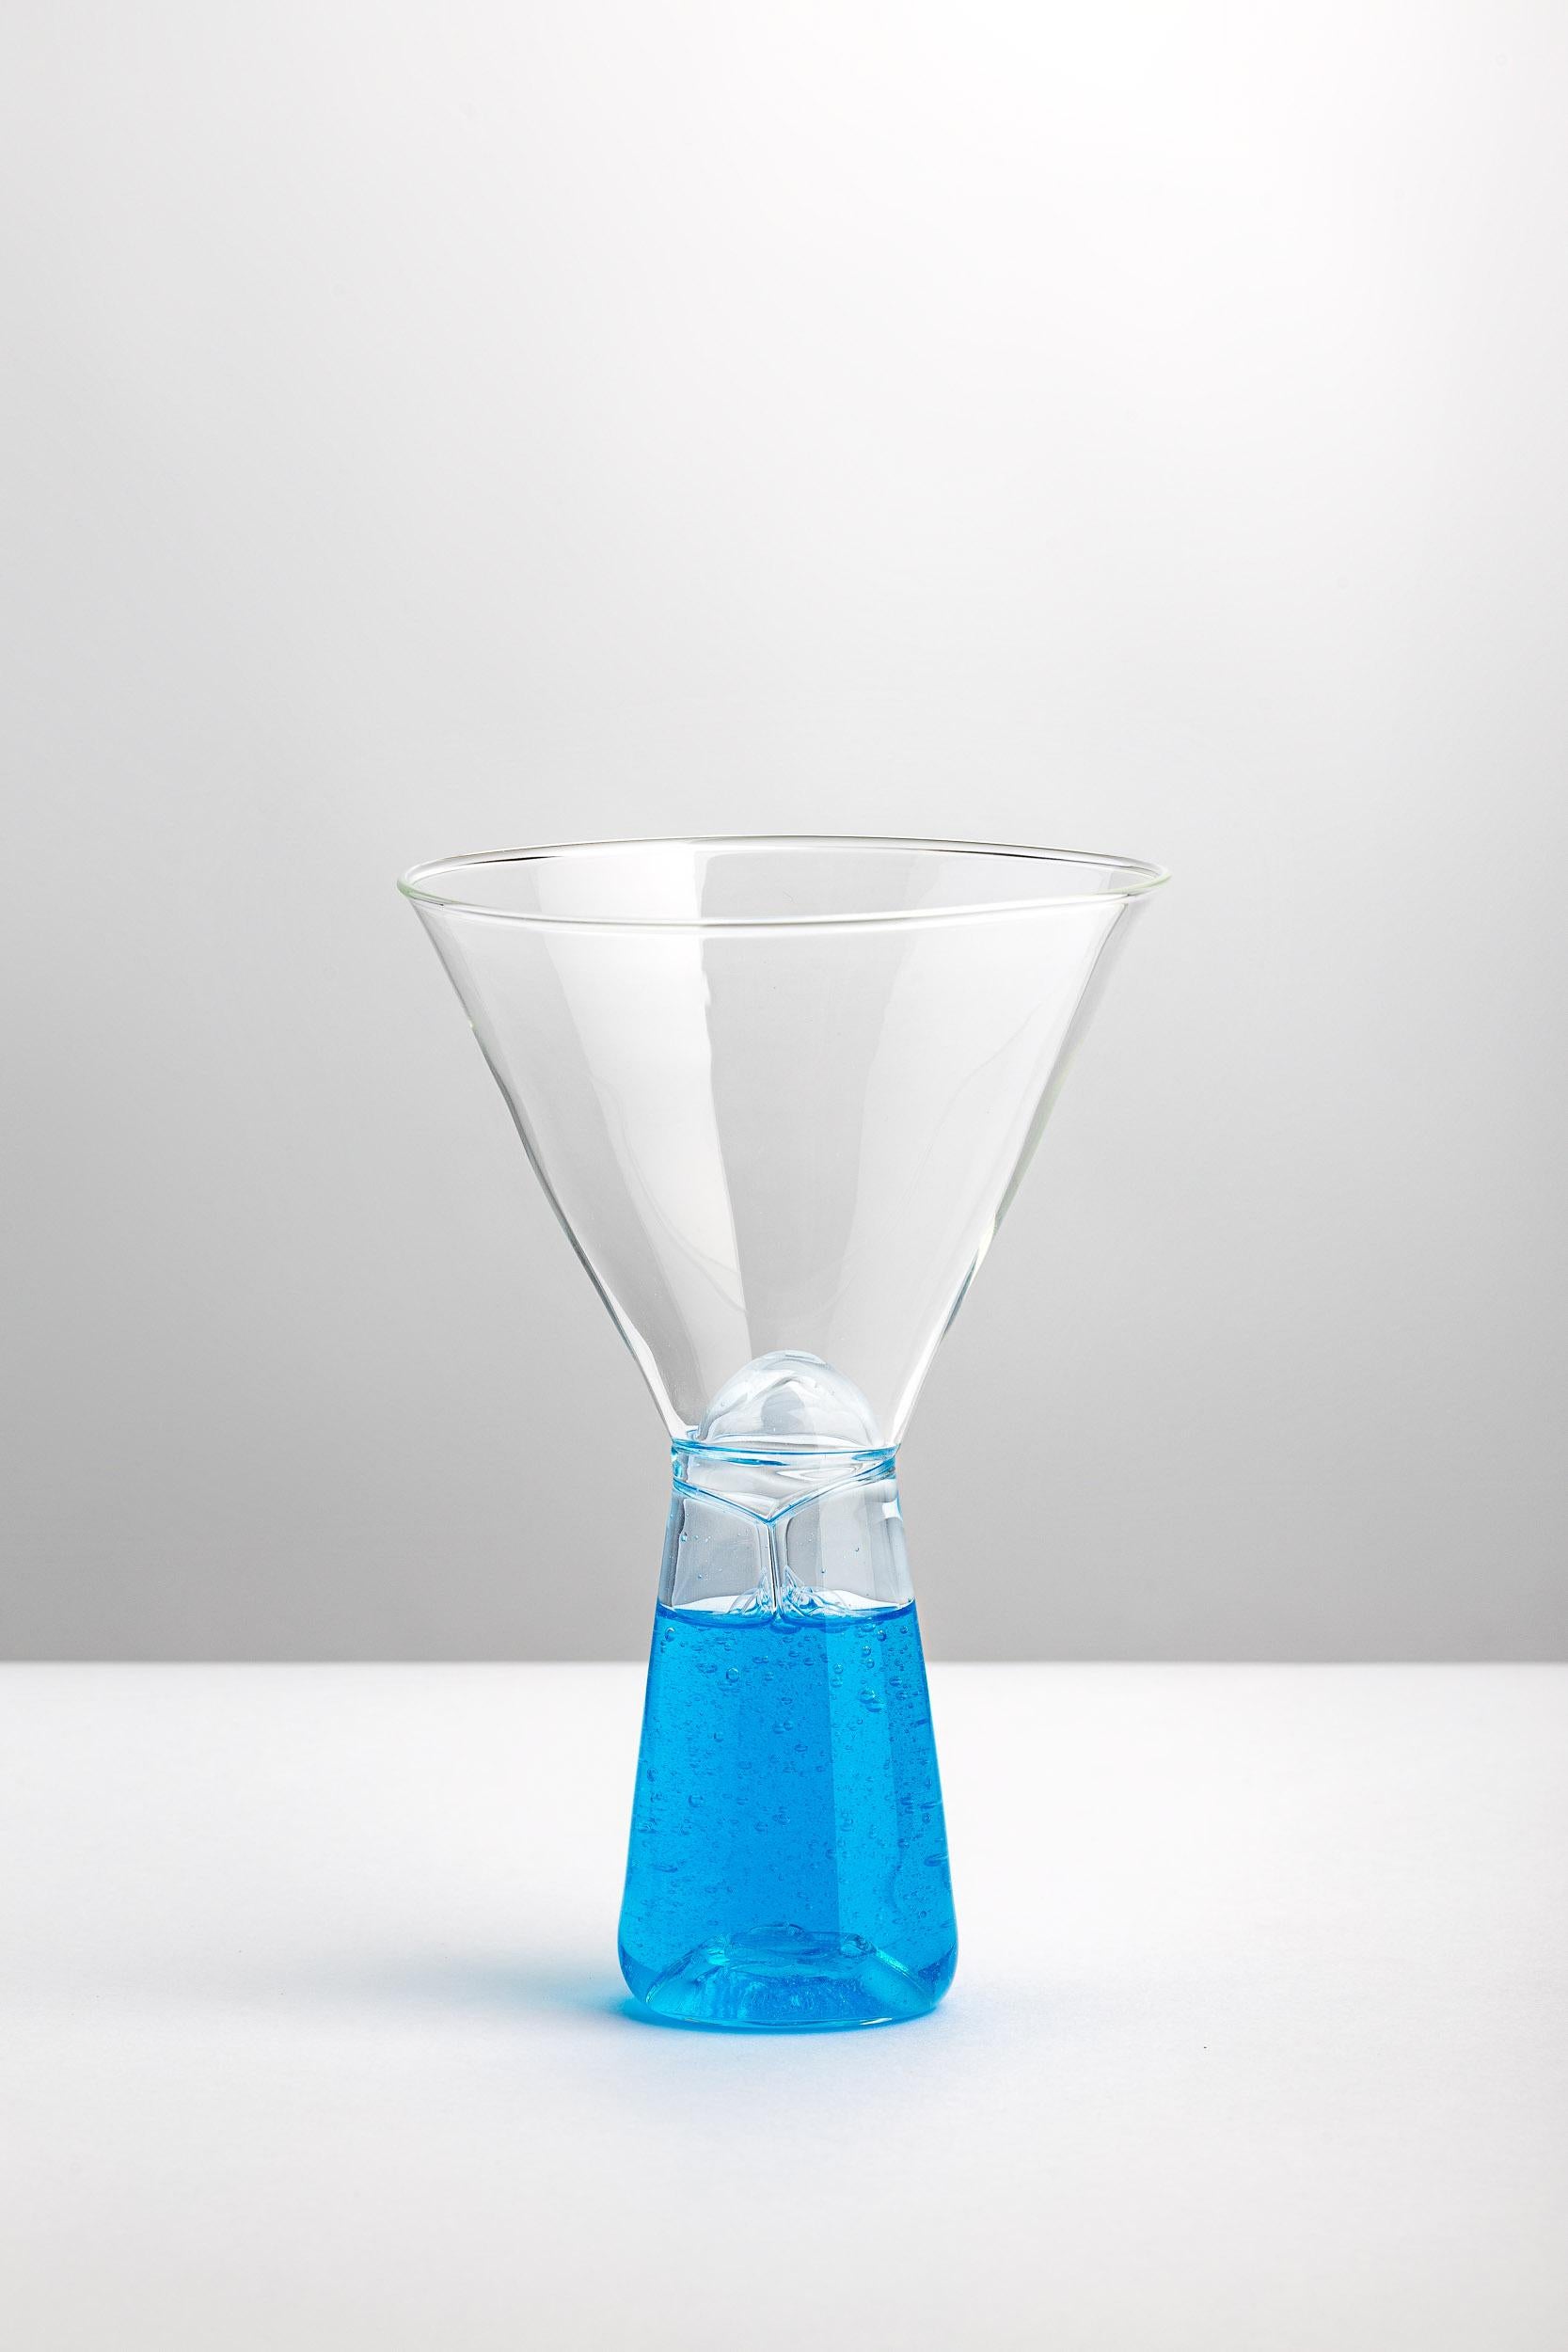 The conical stem filled with colored detergent seems to invade the chalice cup at every sip of our aperitif. Sculpturally beautiful, VELENI’s Martini Glass MG-30lb plays on the dichotomy between attraction and repulsion: every time we have a drink